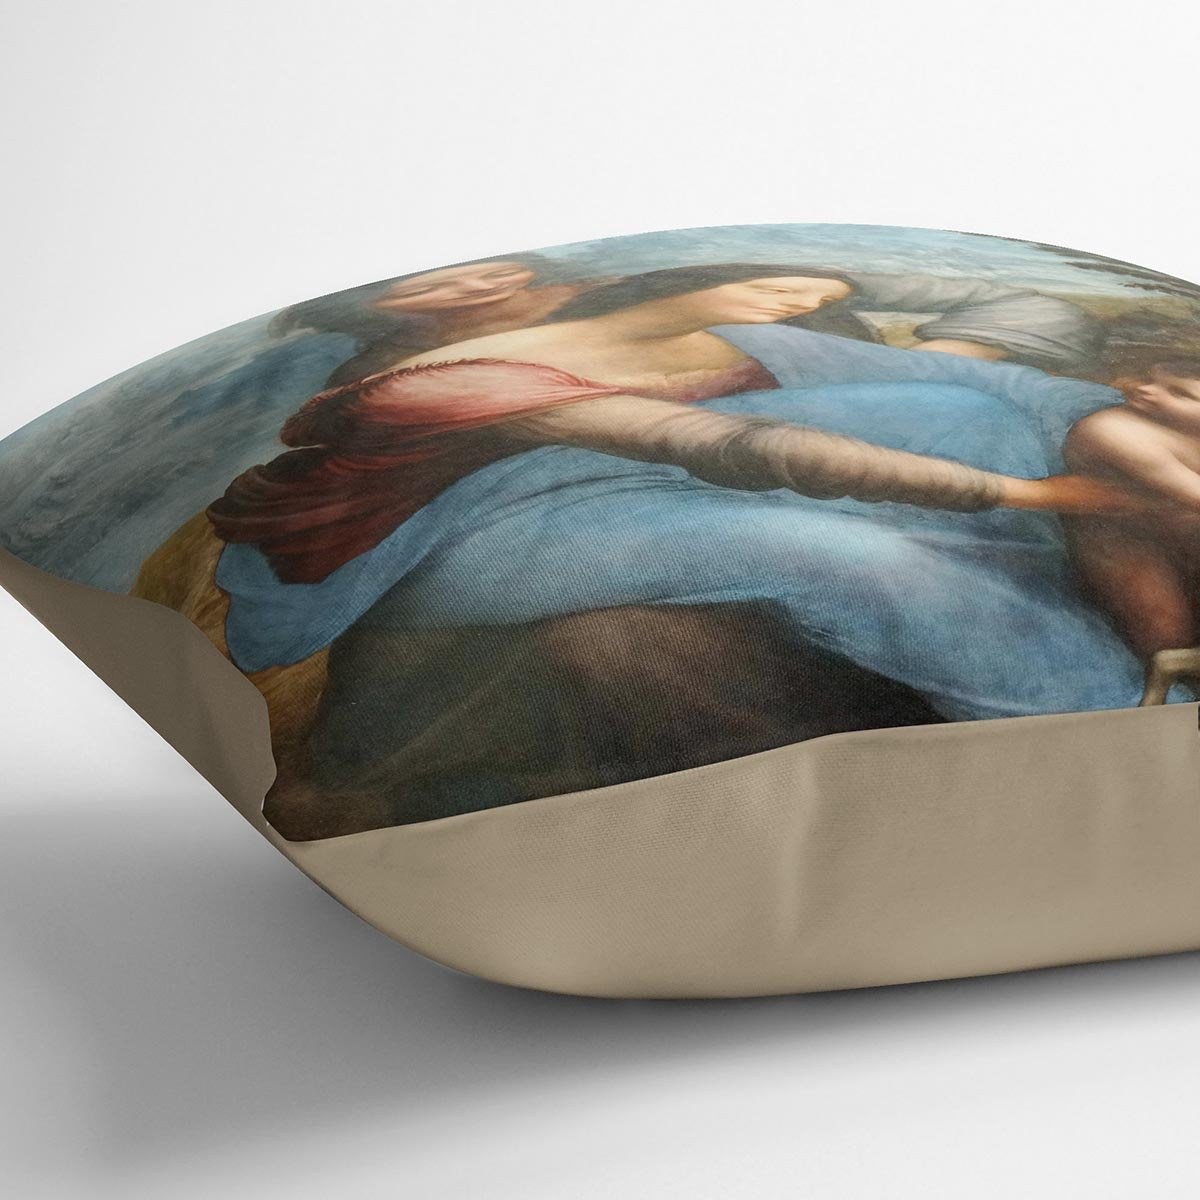 The Virgin and Child with St Anne by Da Vinci Throw Pillow